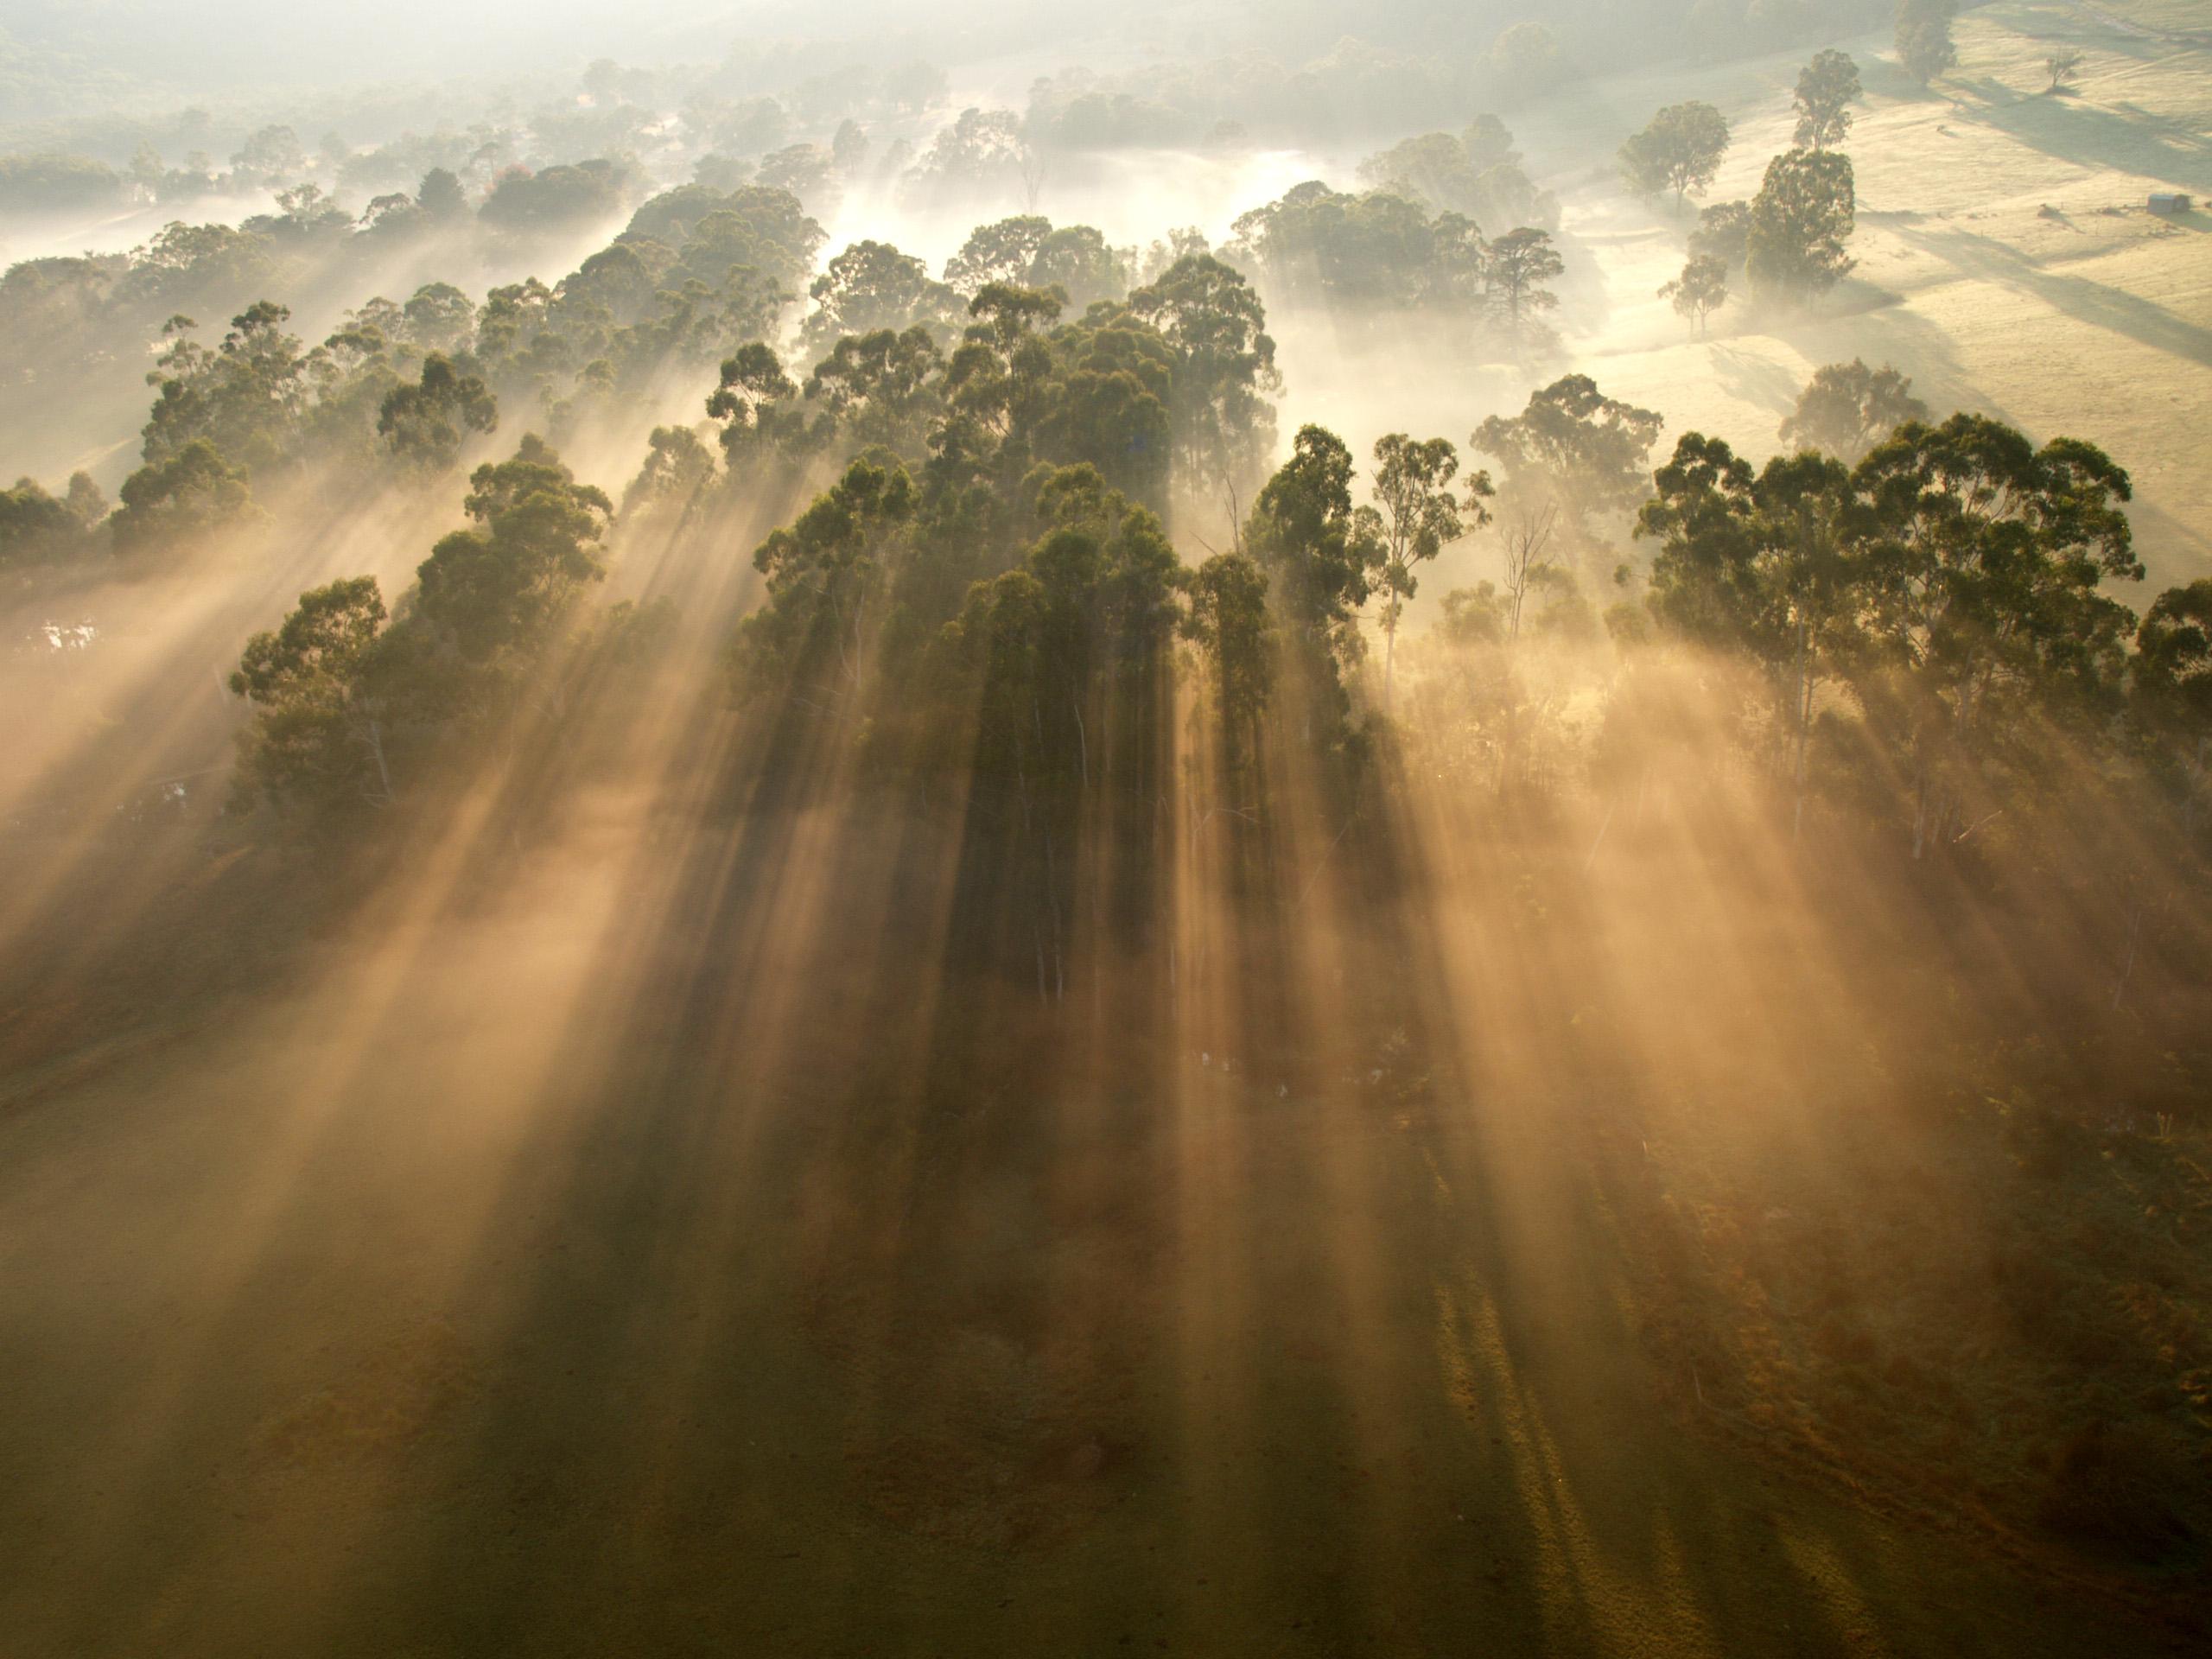 A photo of trees and morning mist taken from a hot air balloon